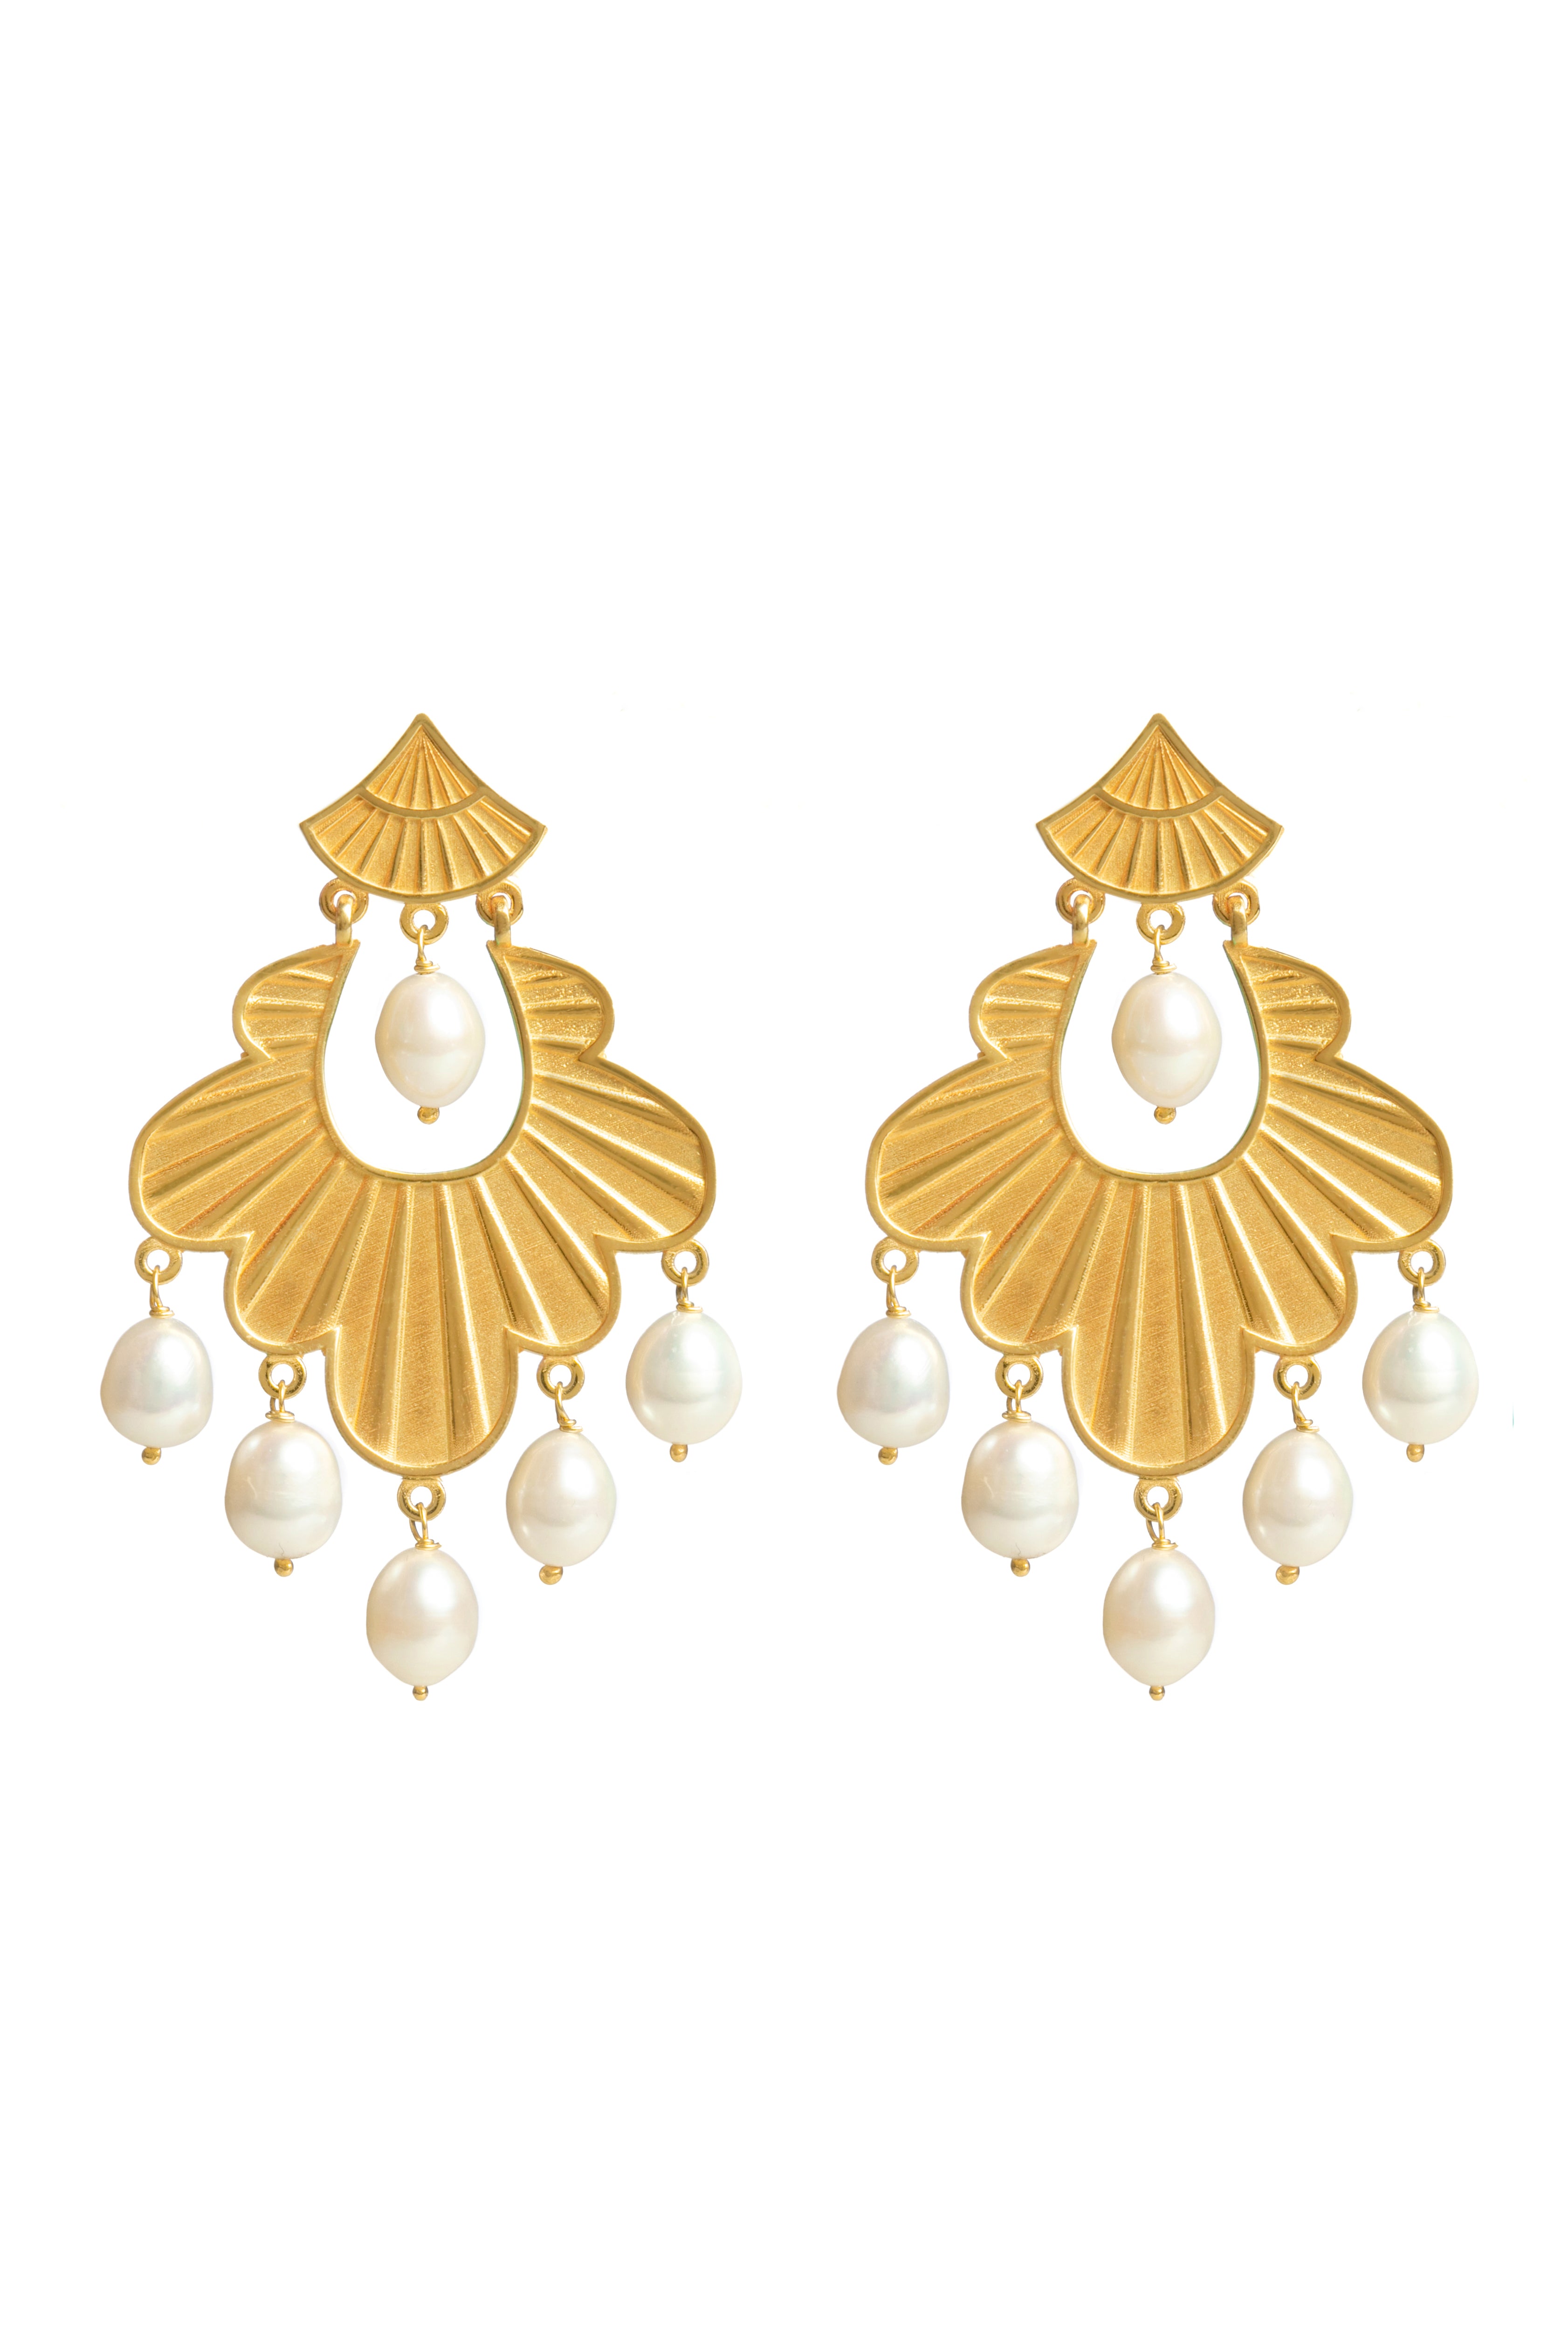 Theopisti pearl earrings Silver 925° by Pearl Martini